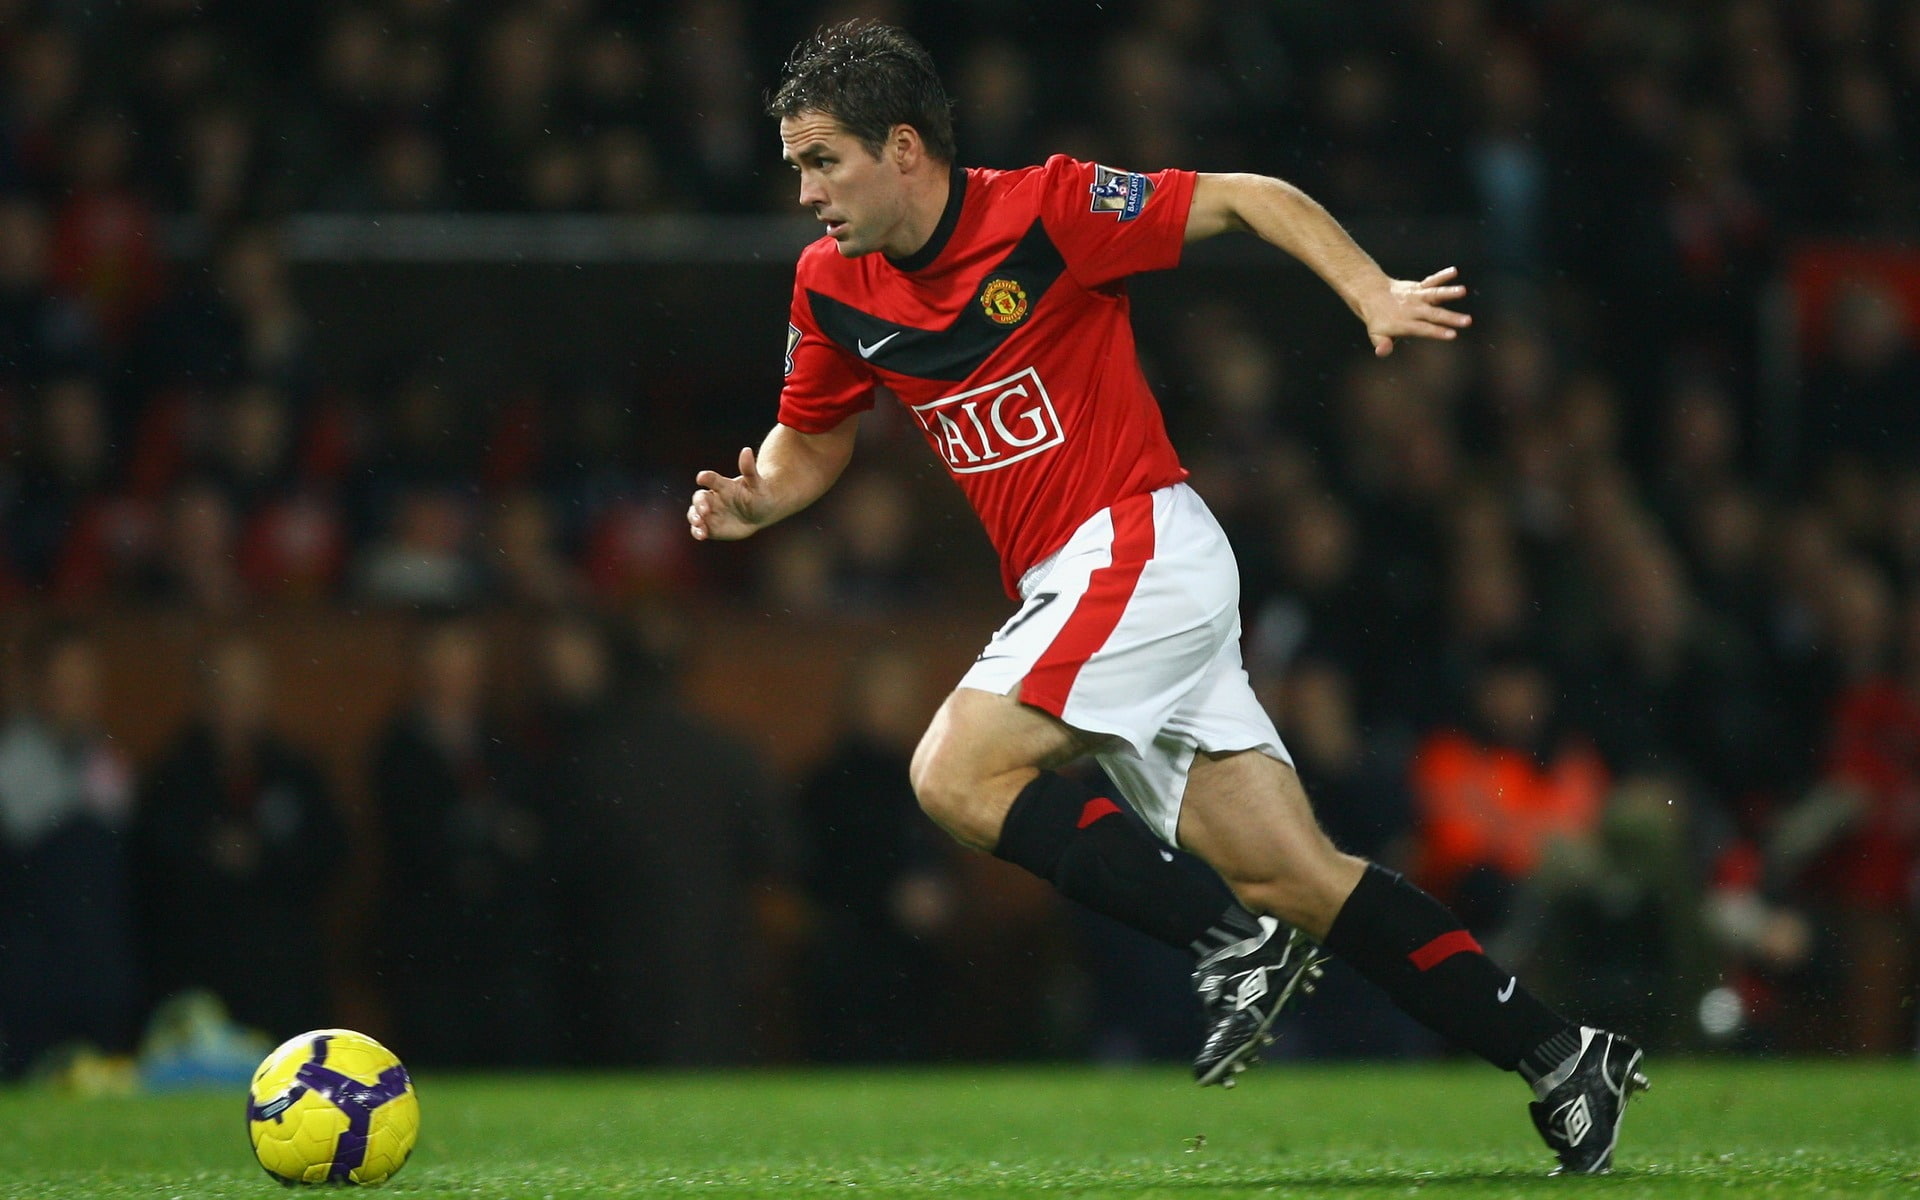 Michael Owen-football star retired commemorate wal.., men's red jersey and white shorts